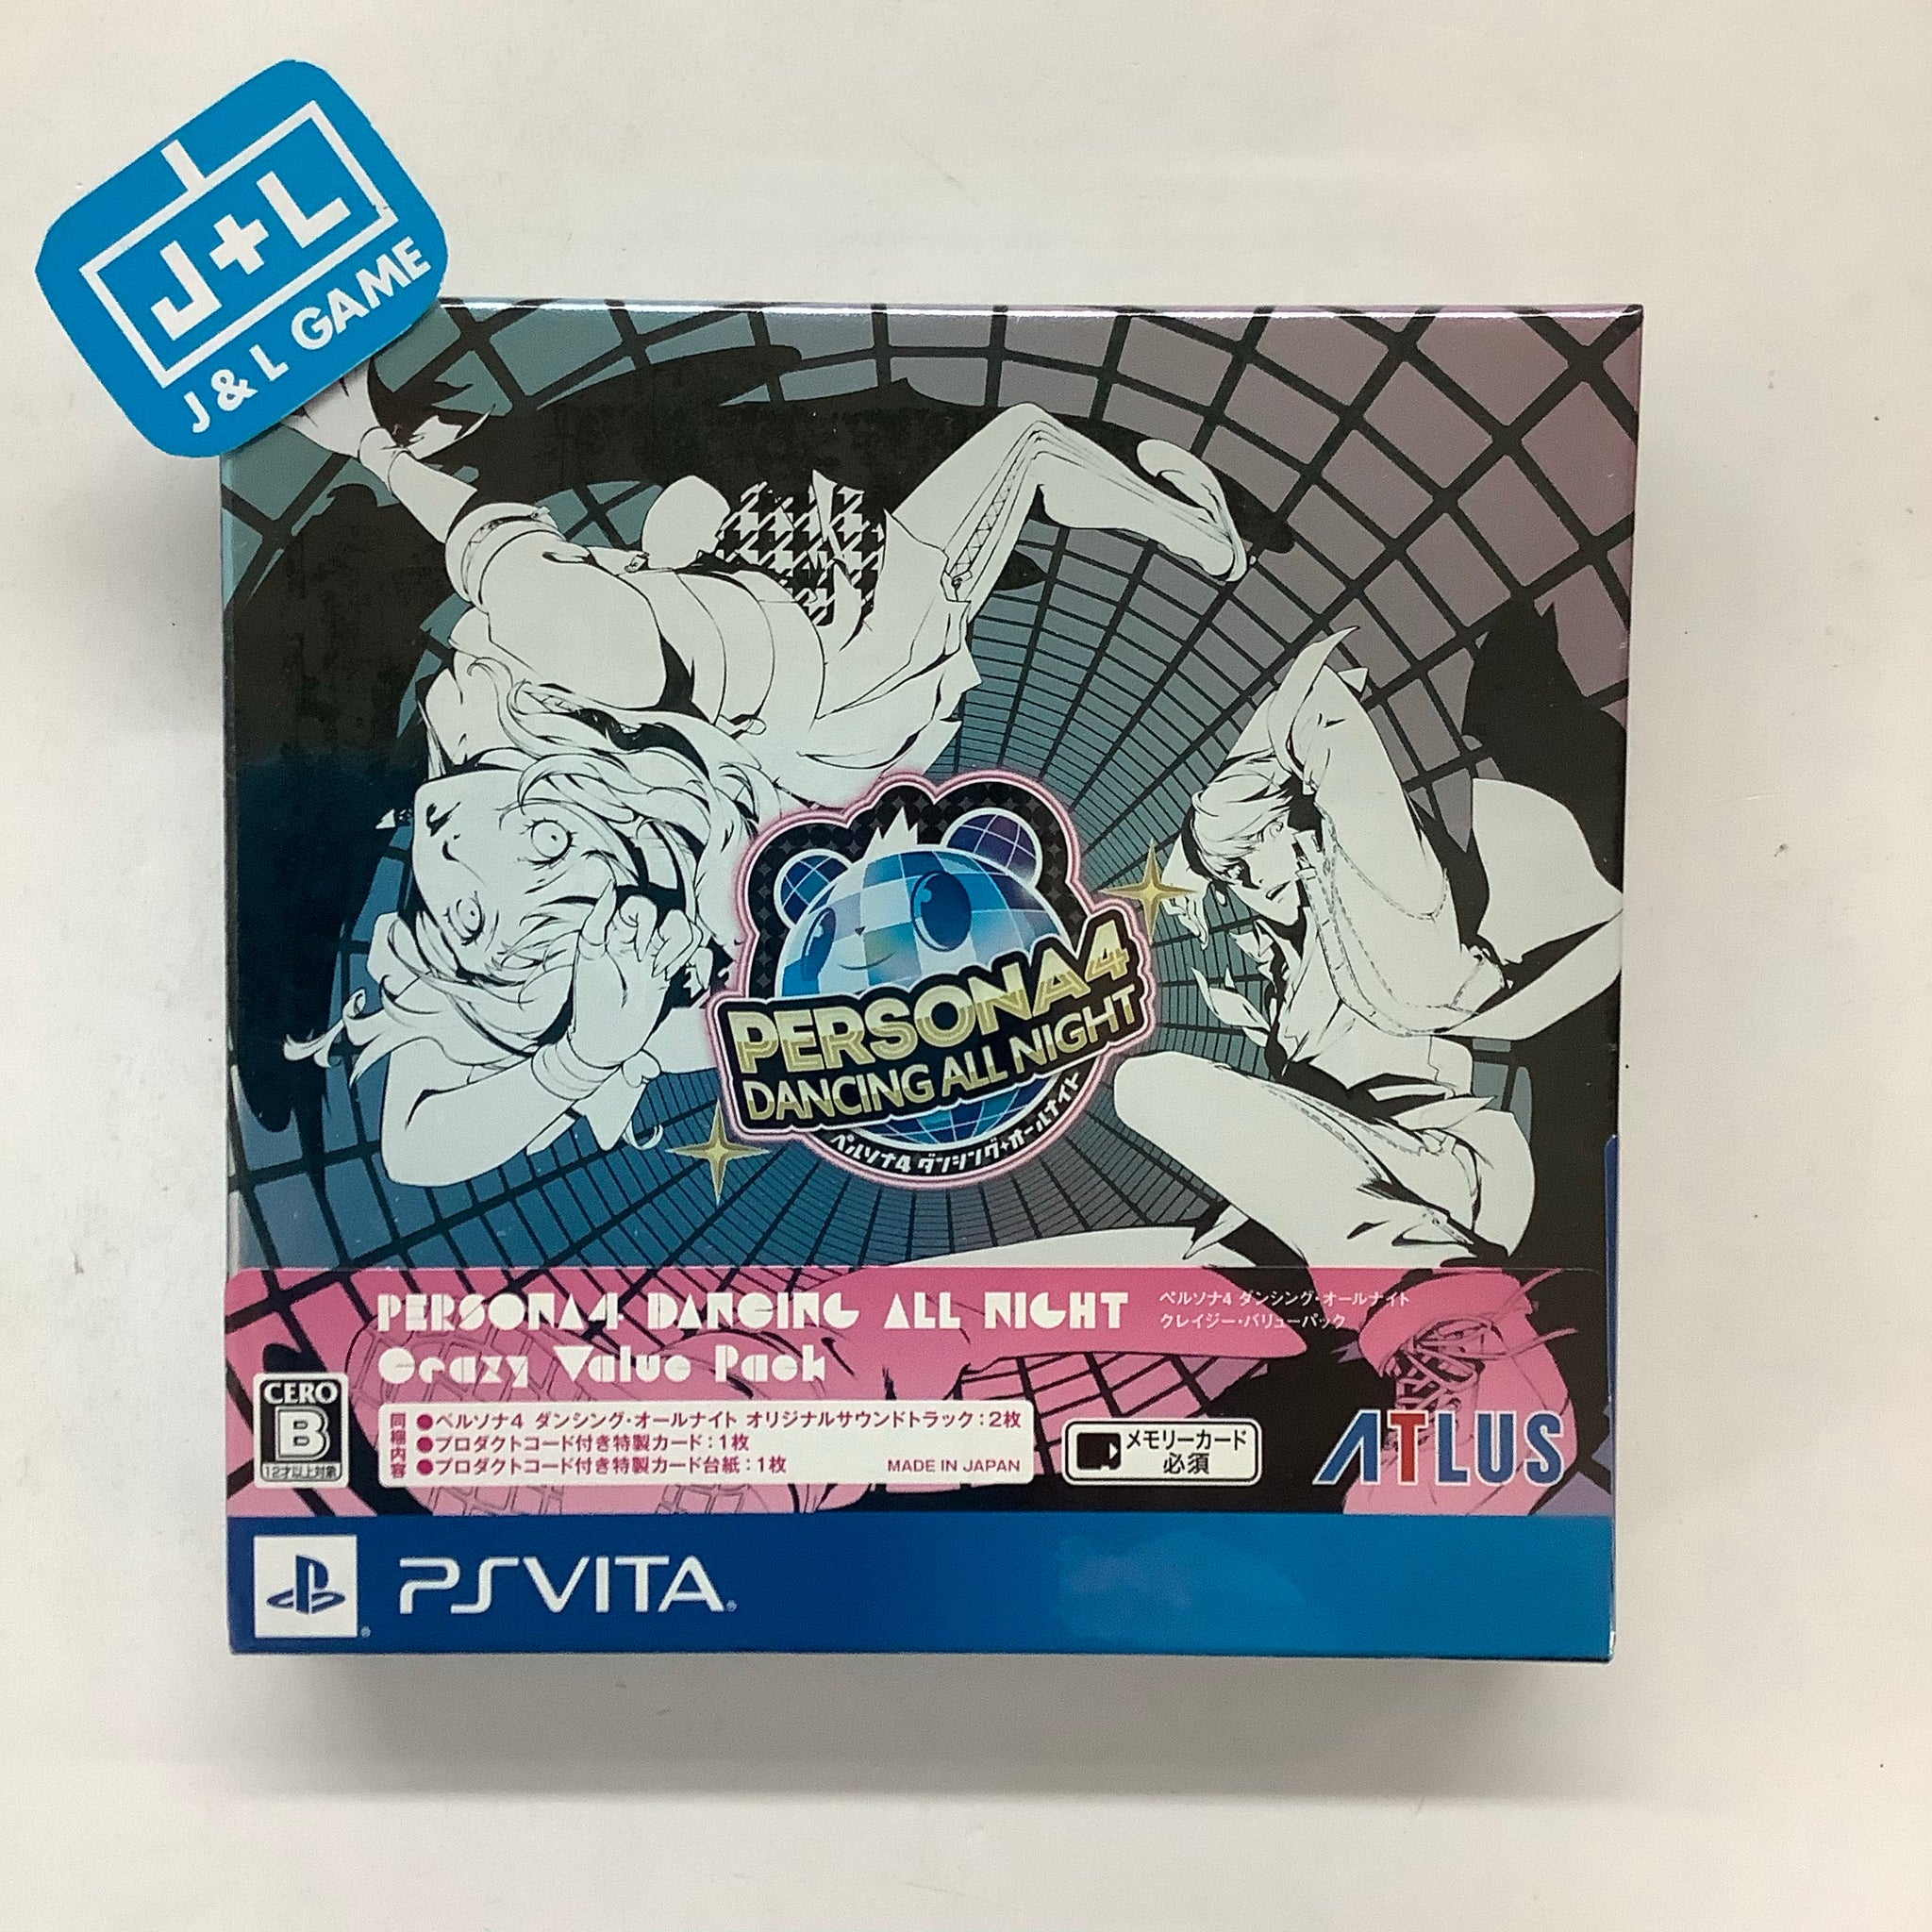 Persona 4: Dancing All Night (Crazy Value Pack) - (PSV) PlayStation Vita (Japanese Import) Video Games Atlus   